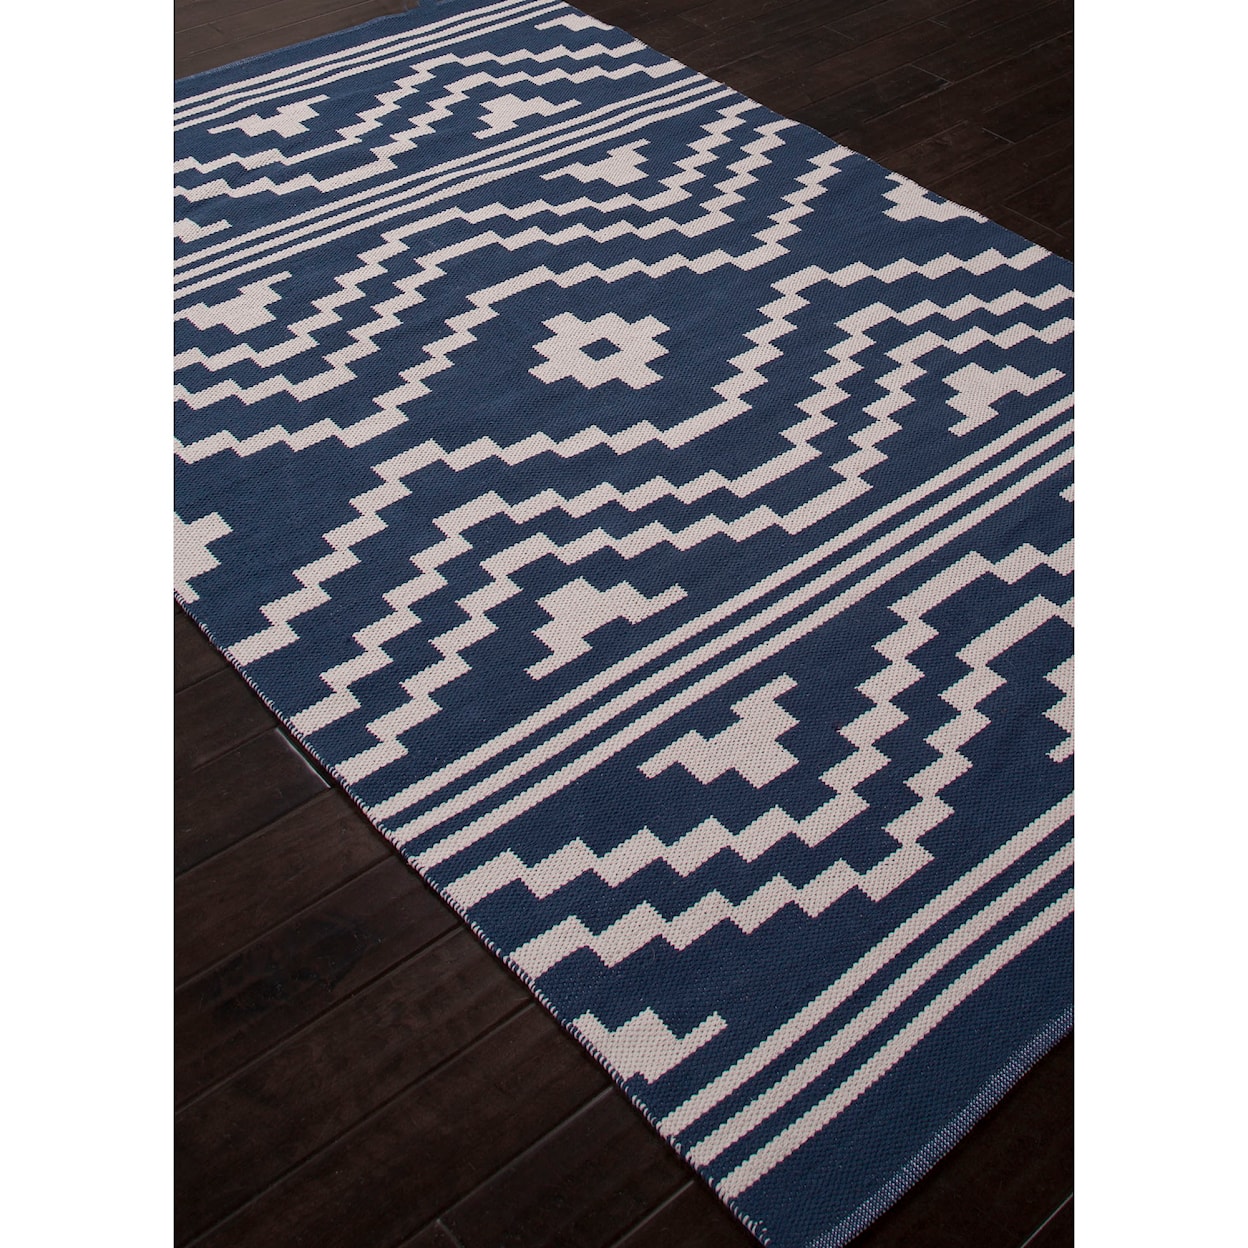 JAIPUR Living Traditions Modern Cotton Flat Weave 5 x 8 Rug